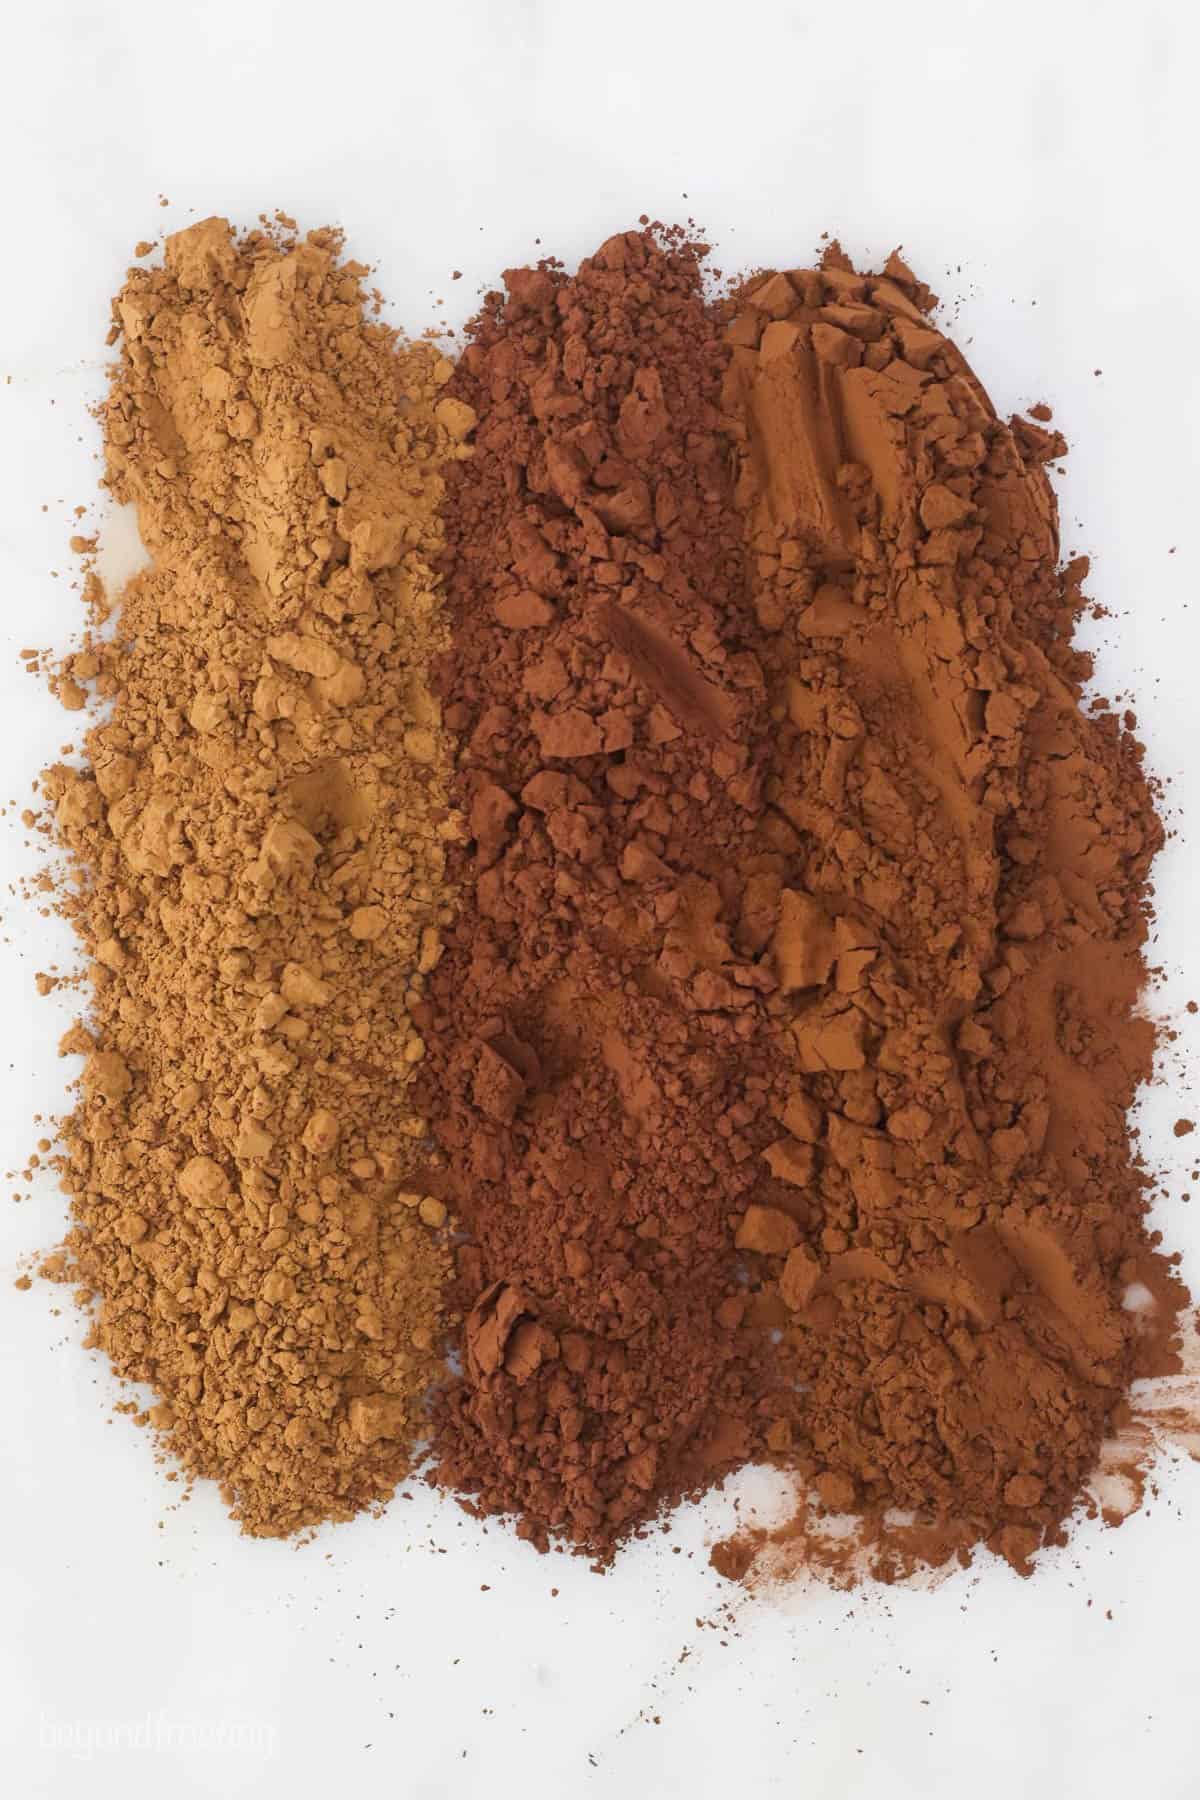 3 types of cocoa powder laid out on the table